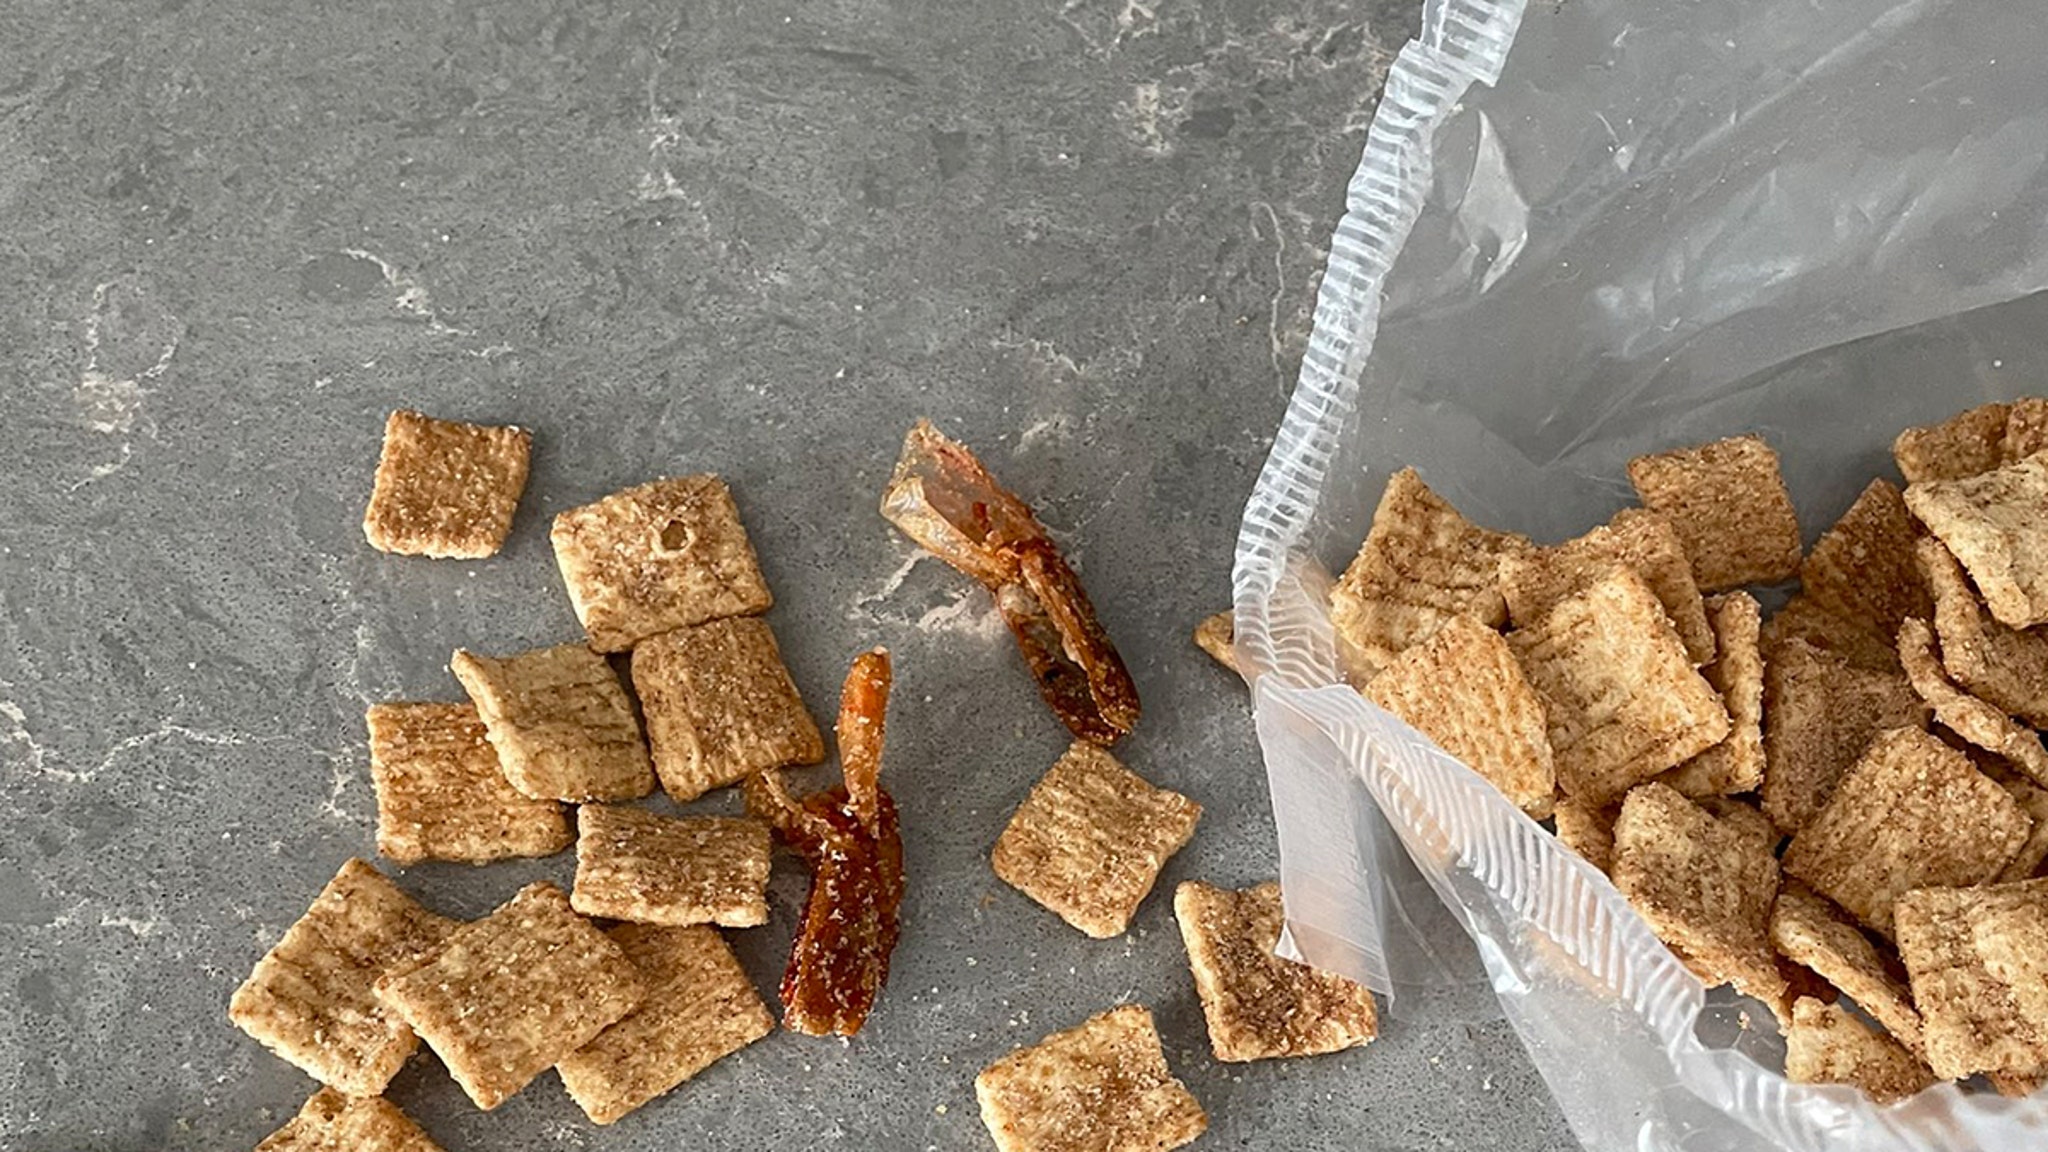 Shrimp tails and other goodies allegedly found in cinnamon toast sandwiches